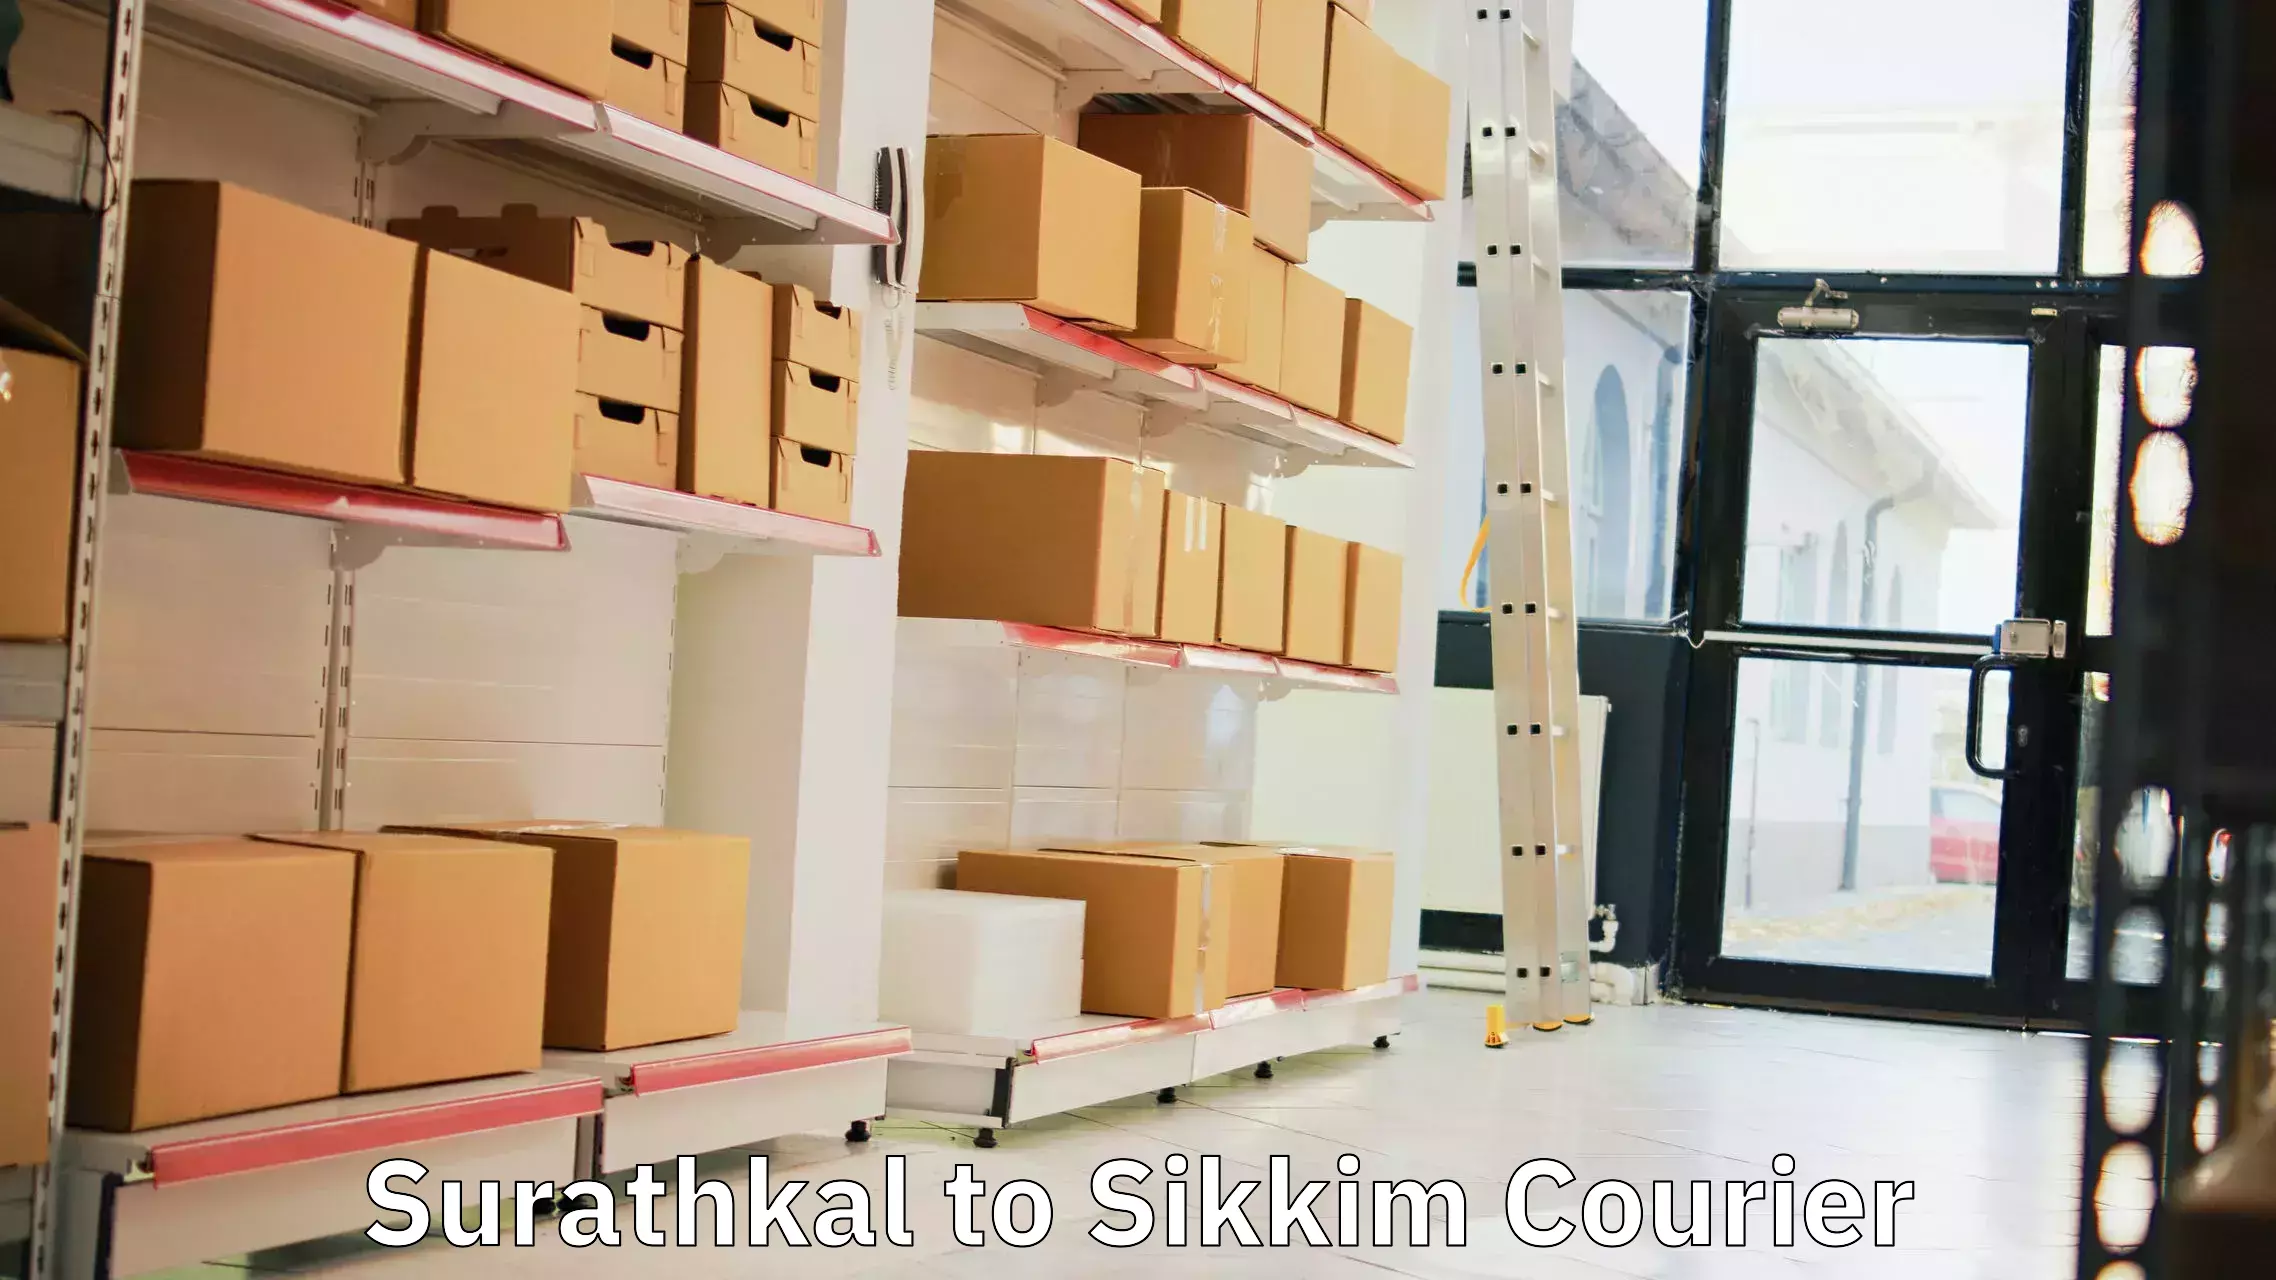 Subscription-based courier Surathkal to Sikkim